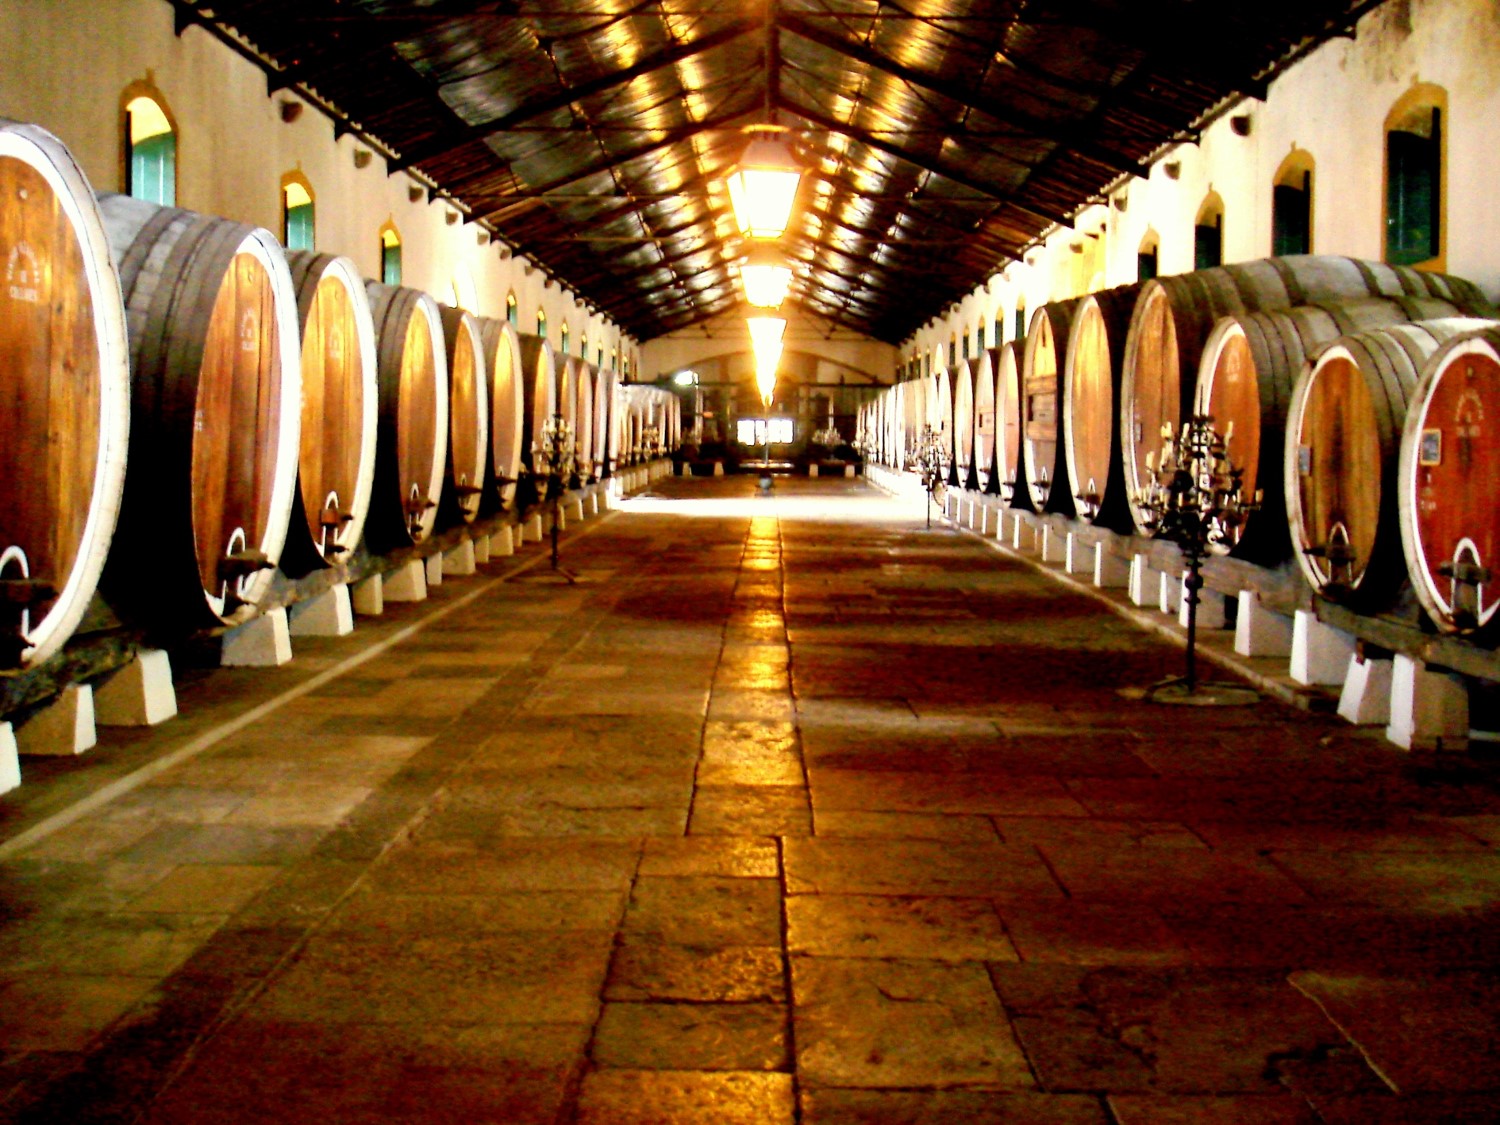 Adega Cooperativa de Colares - Sintra and the wines of the old world